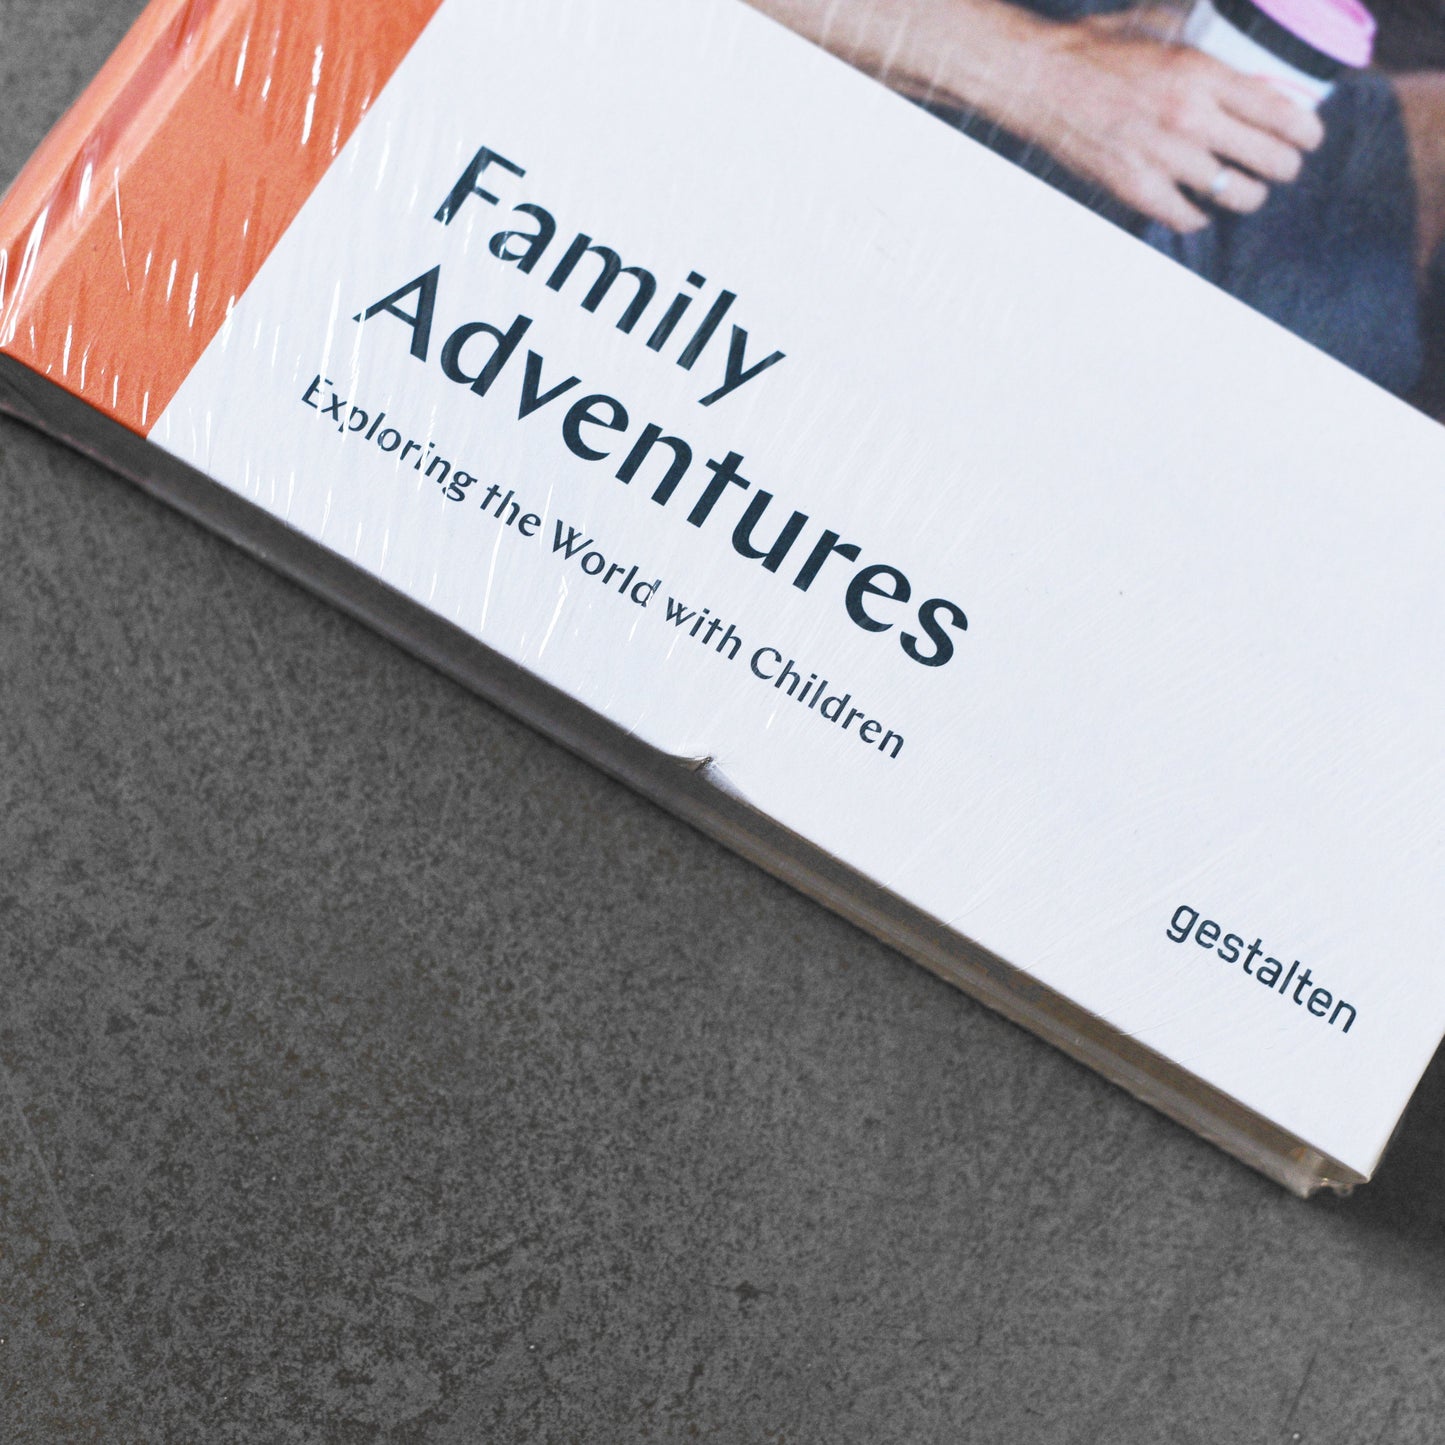 Family Adventures: Exploring the World with Children